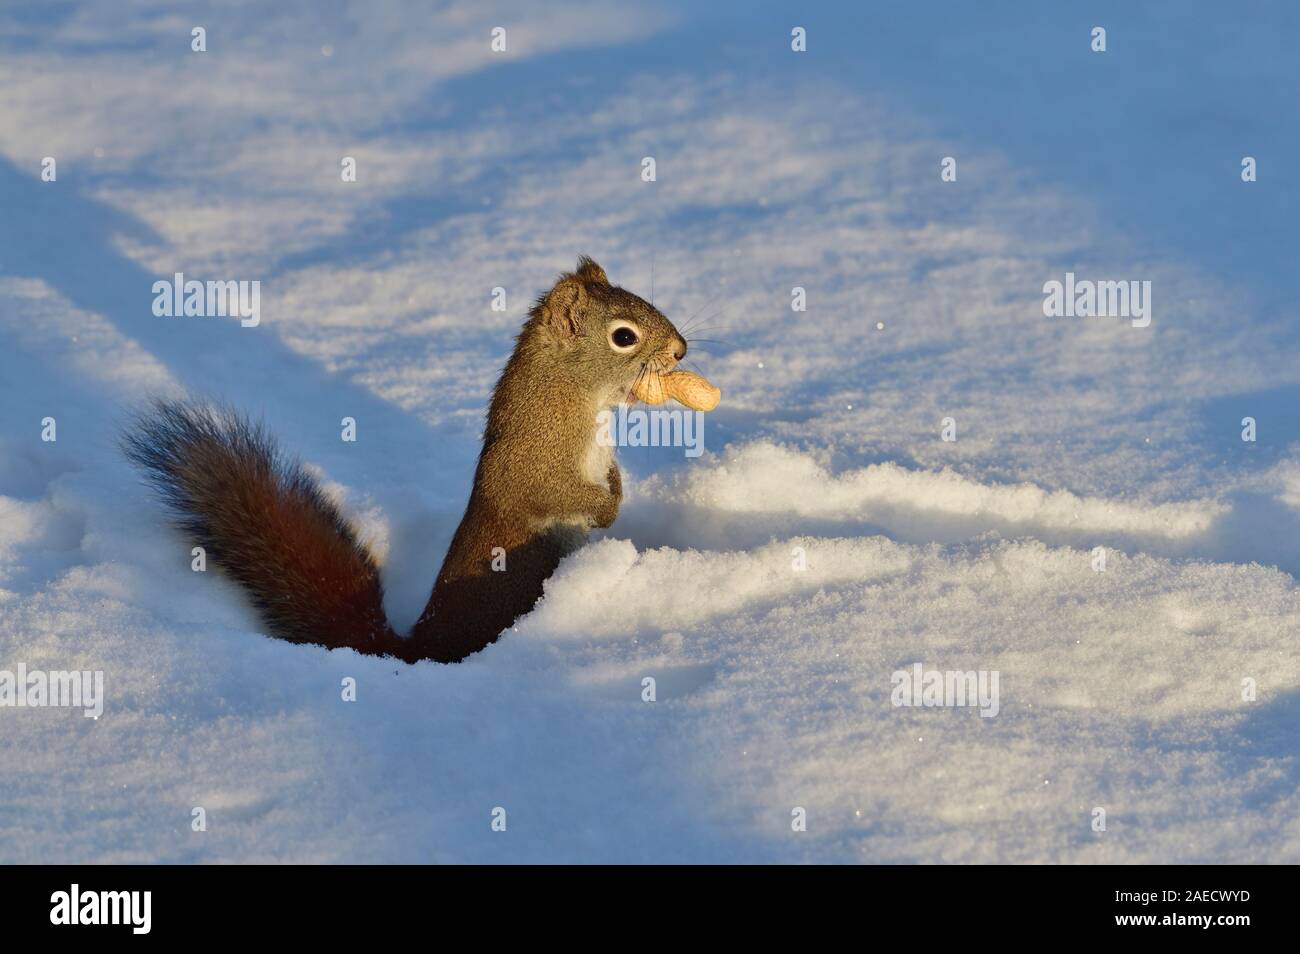 A wild red squirrel 'Tamiasciurus hudsonicus', traveling through the deep snow with his prize of a peanut that he is holding in his mouth. Stock Photo